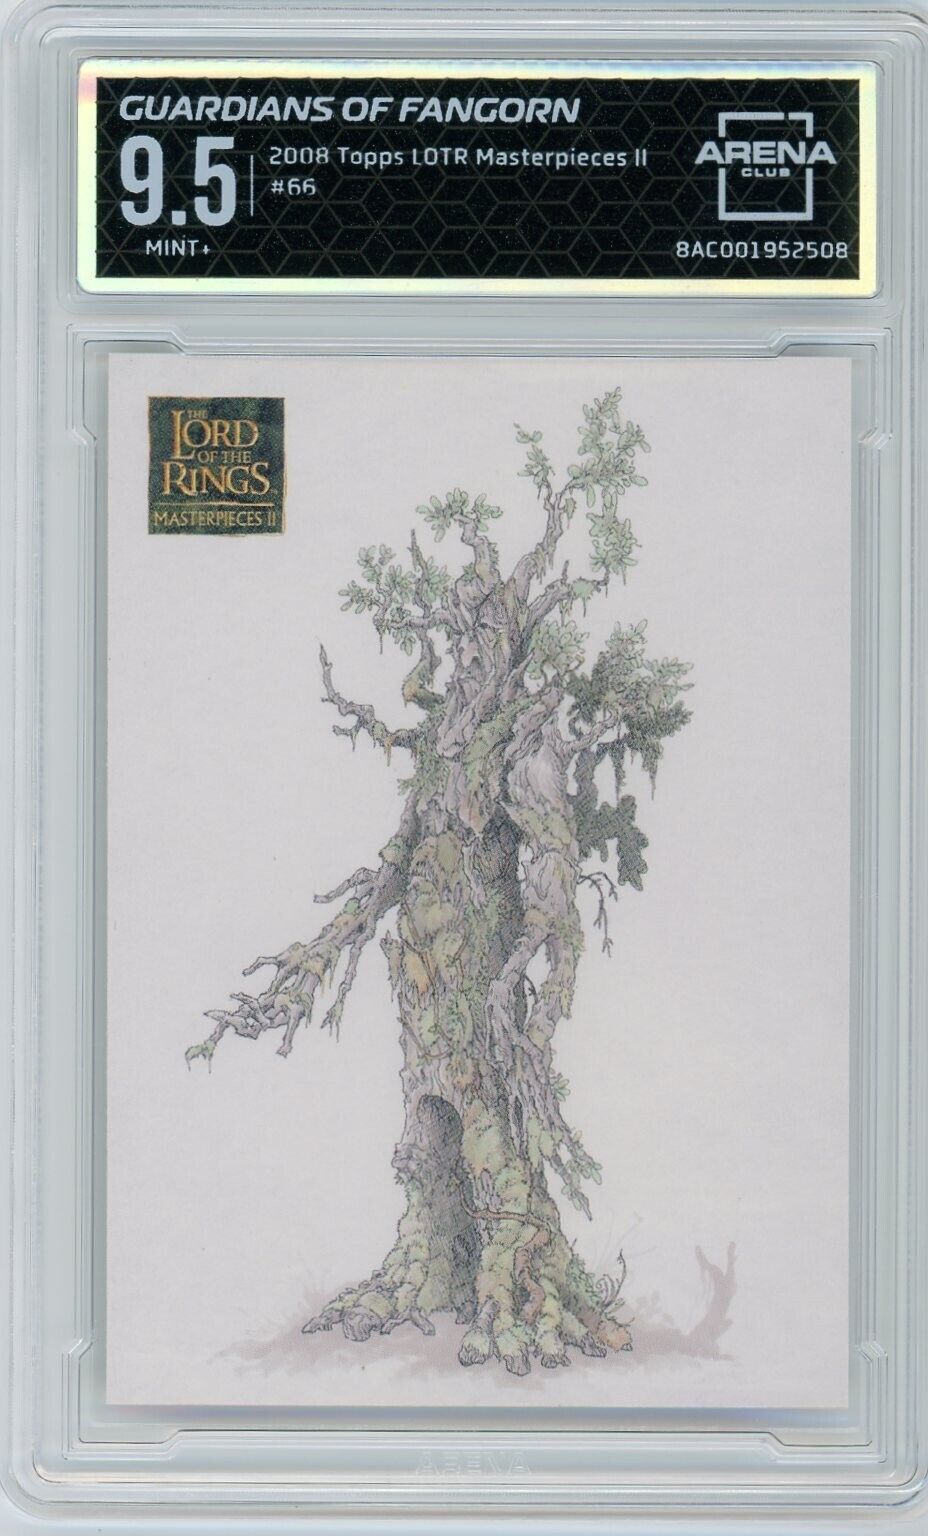 2008 Topps The Lord of the Rings #66 Guardians of Fangorn Ents Arena Club 9 Mint